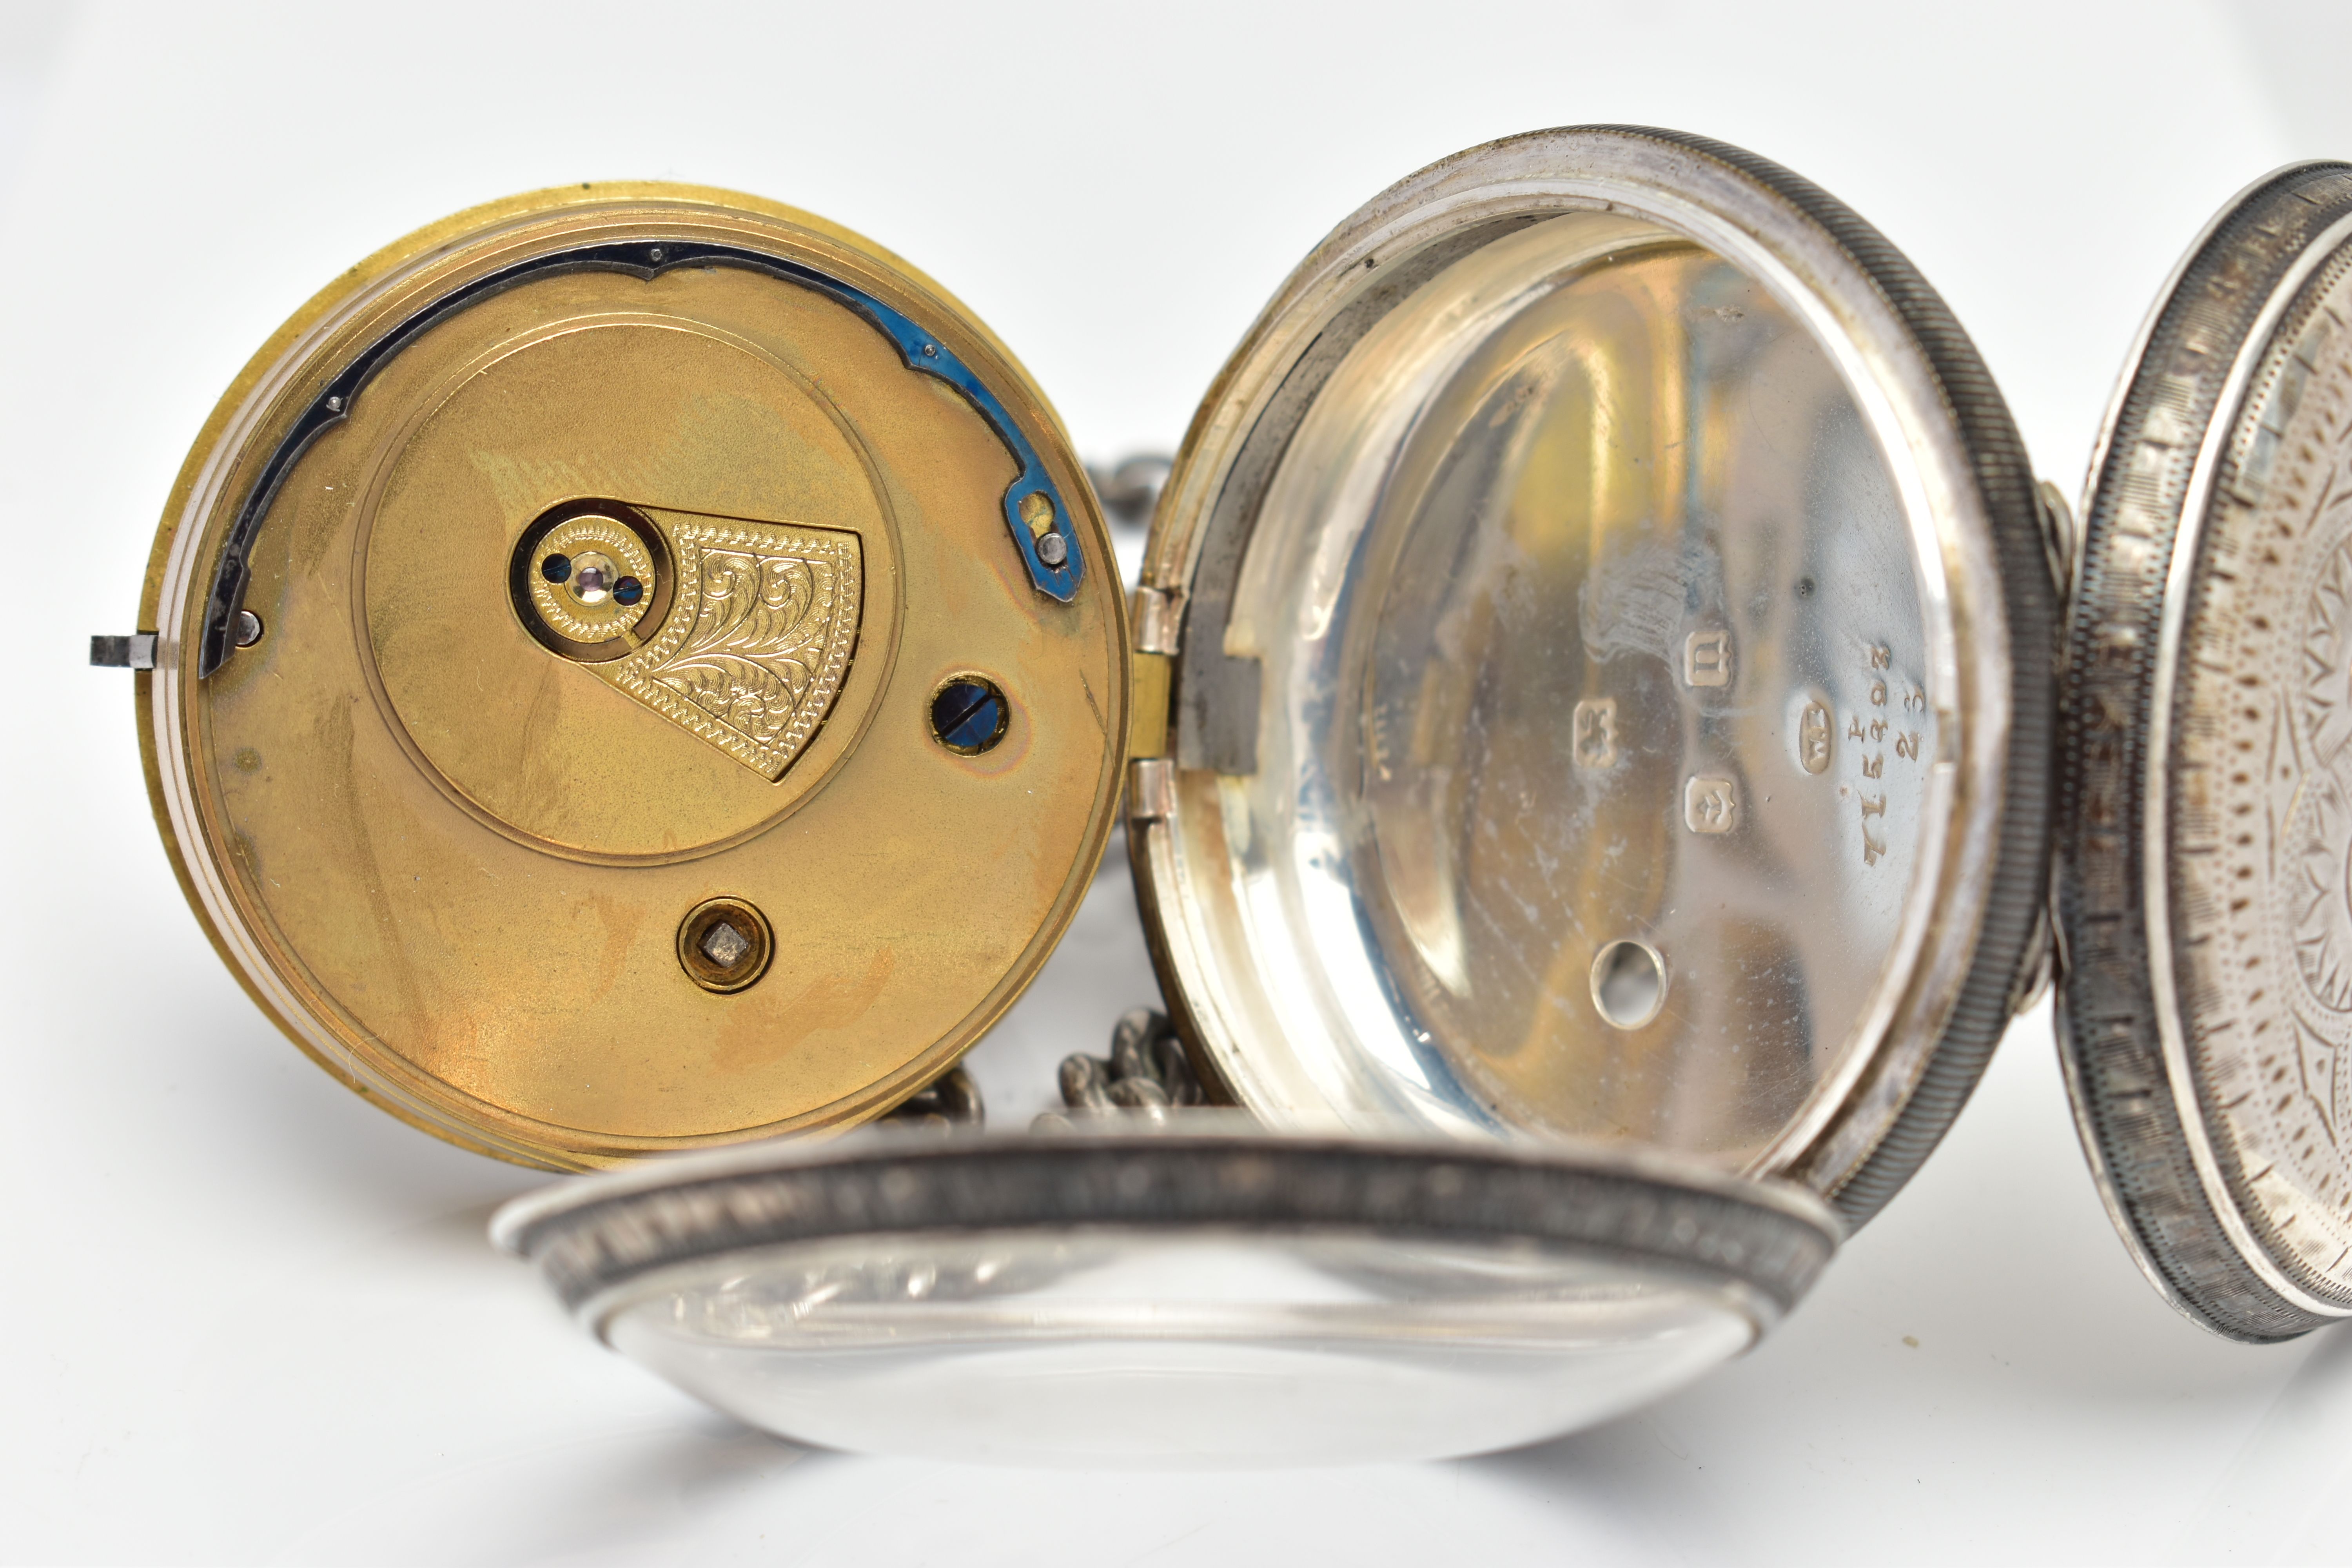 AN EARLY 20TH CENTURY OPEN FACE POCKET WATCH AND ALBERT CHAIN, the key wound pocket watch with a - Image 7 of 8